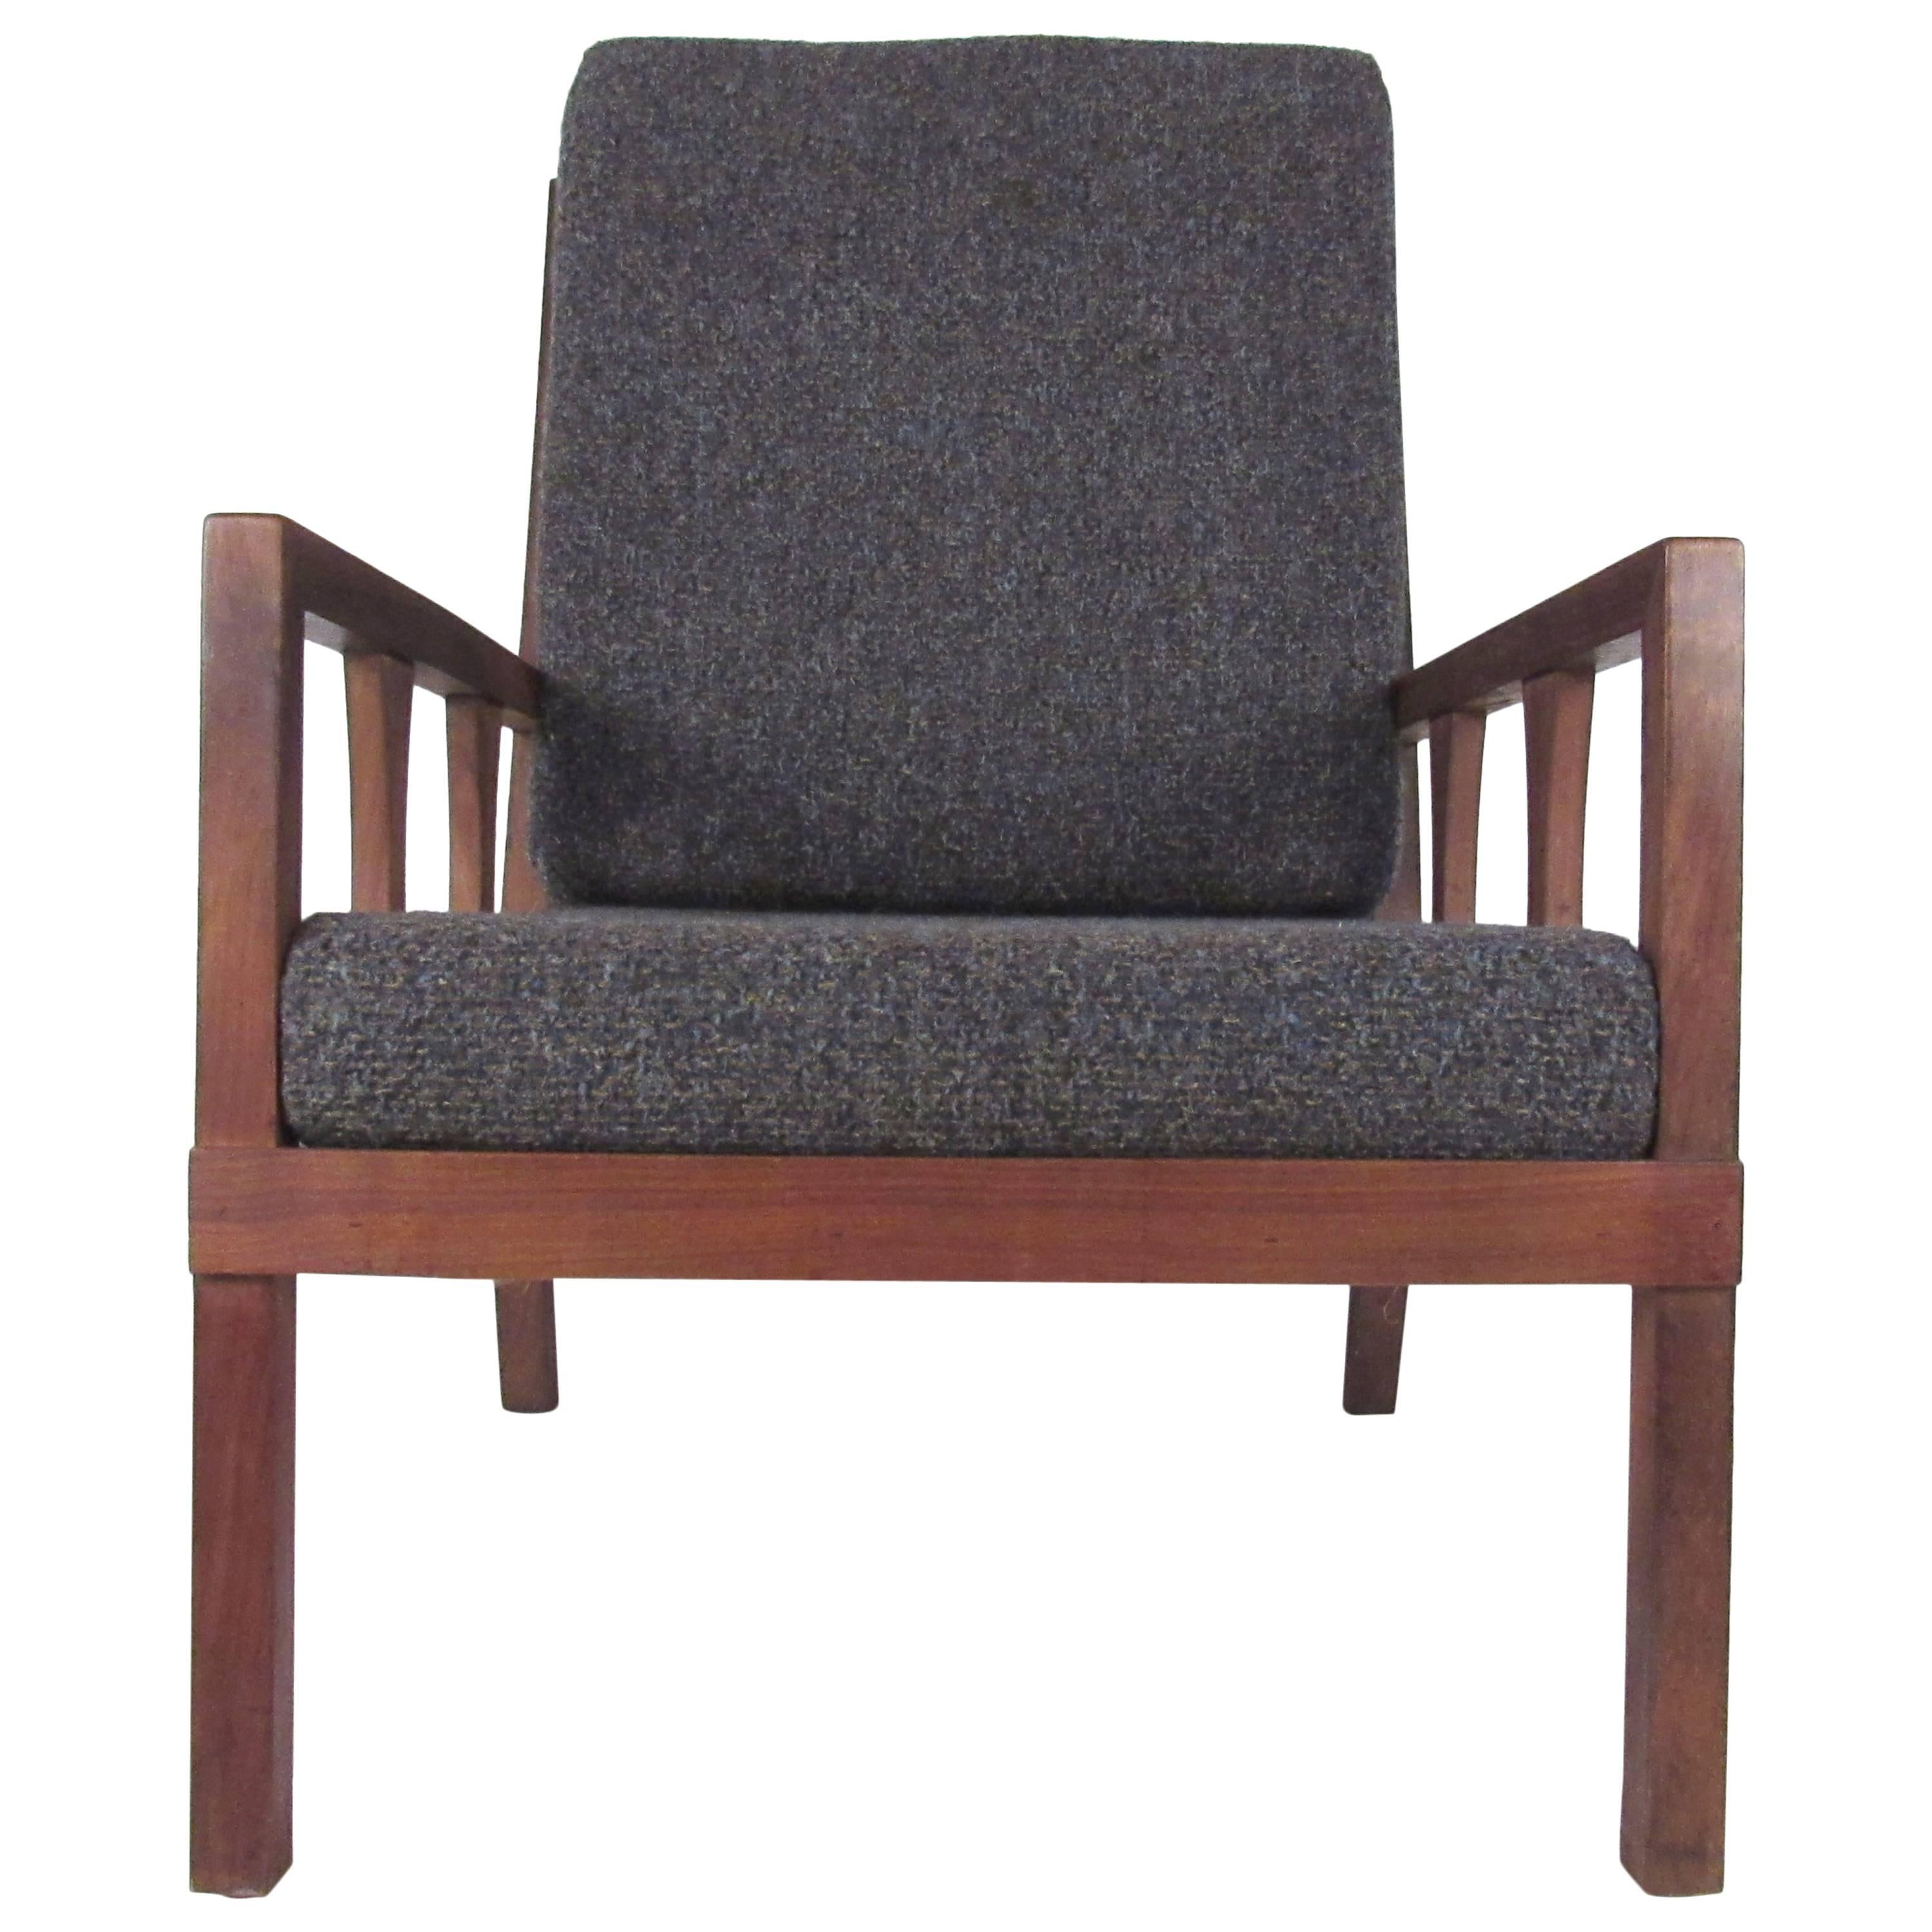 American Mid-Century Modern Arm Chair For Sale